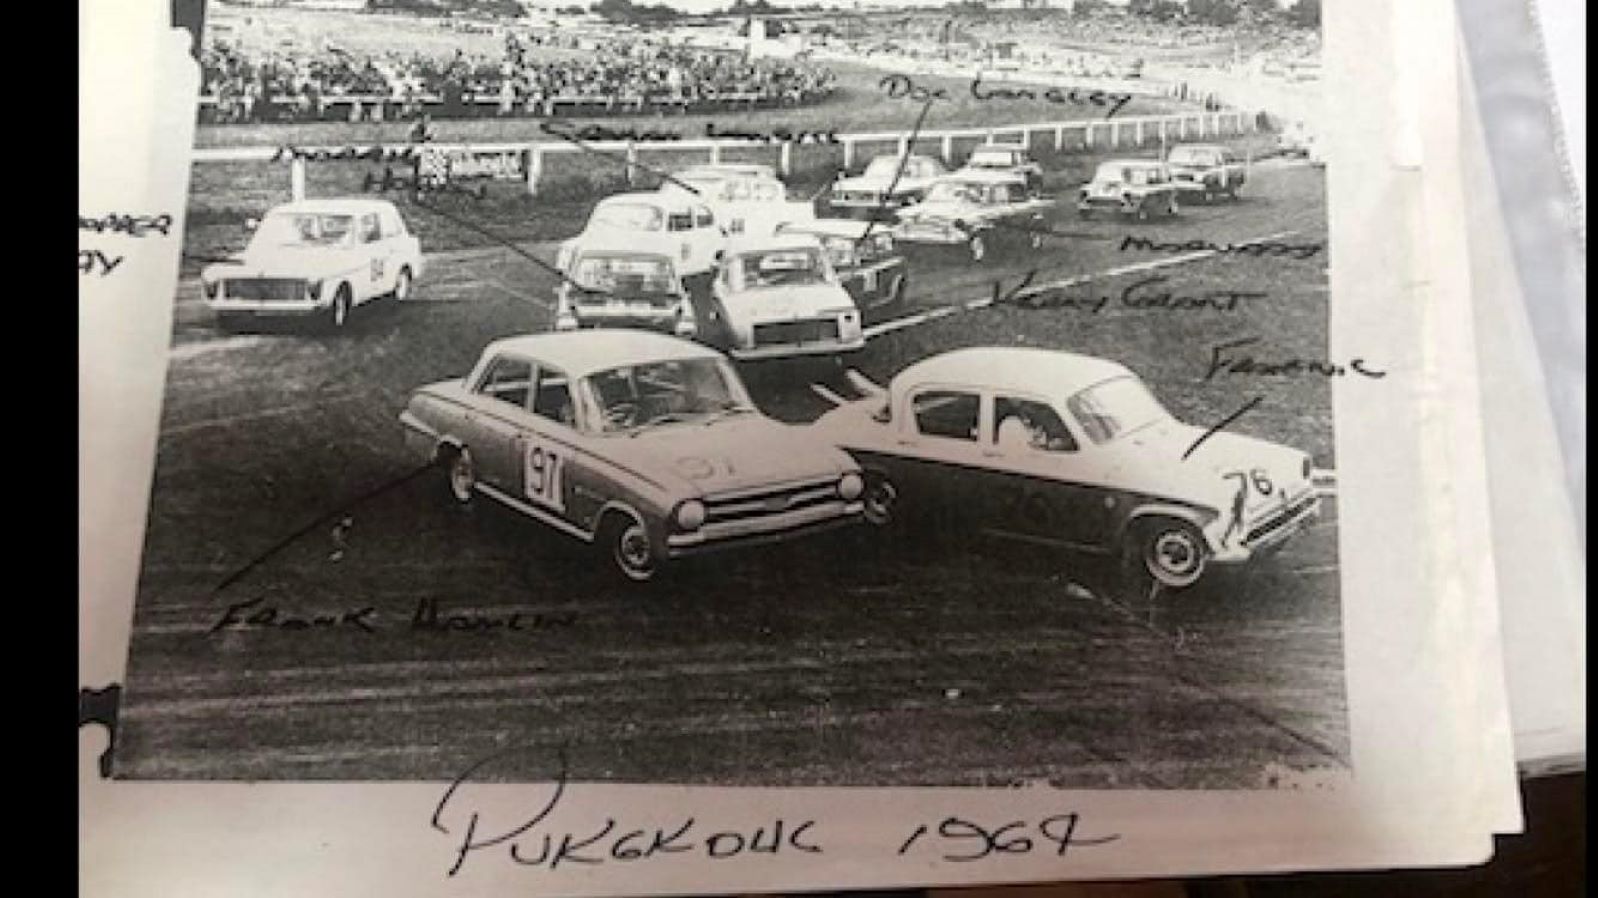 Name:  Pukekohe 1964 #022 1964 Saloon Car field at the Elbow - GP meeting Q 172 kb arch HVRA Bruce Dyer.jpg
Views: 308
Size:  172.4 KB